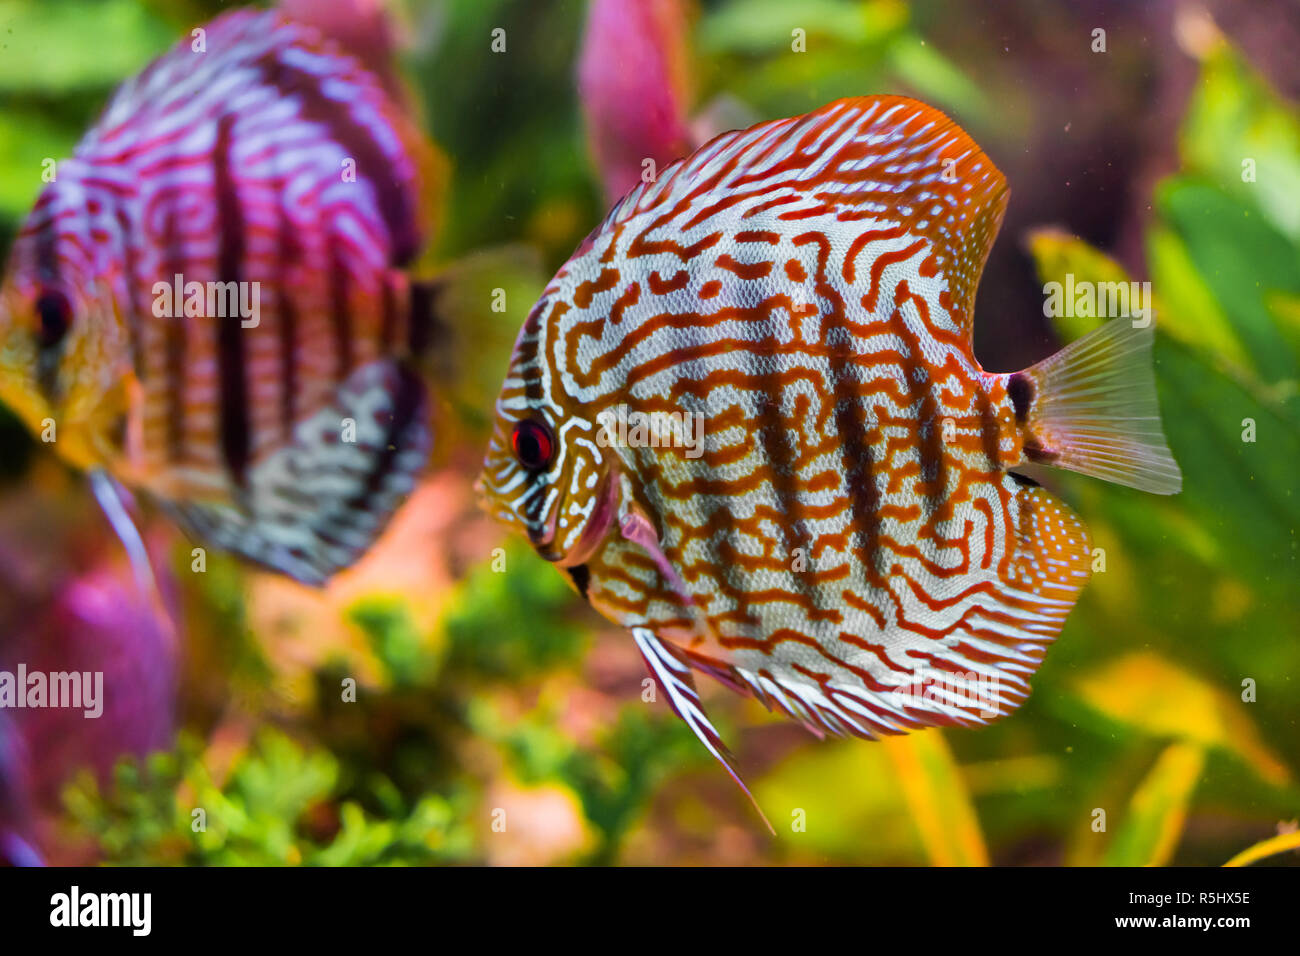 funny red turquoise discus fish in closeup with another one swimming in the background giving a mirror effect Stock Photo